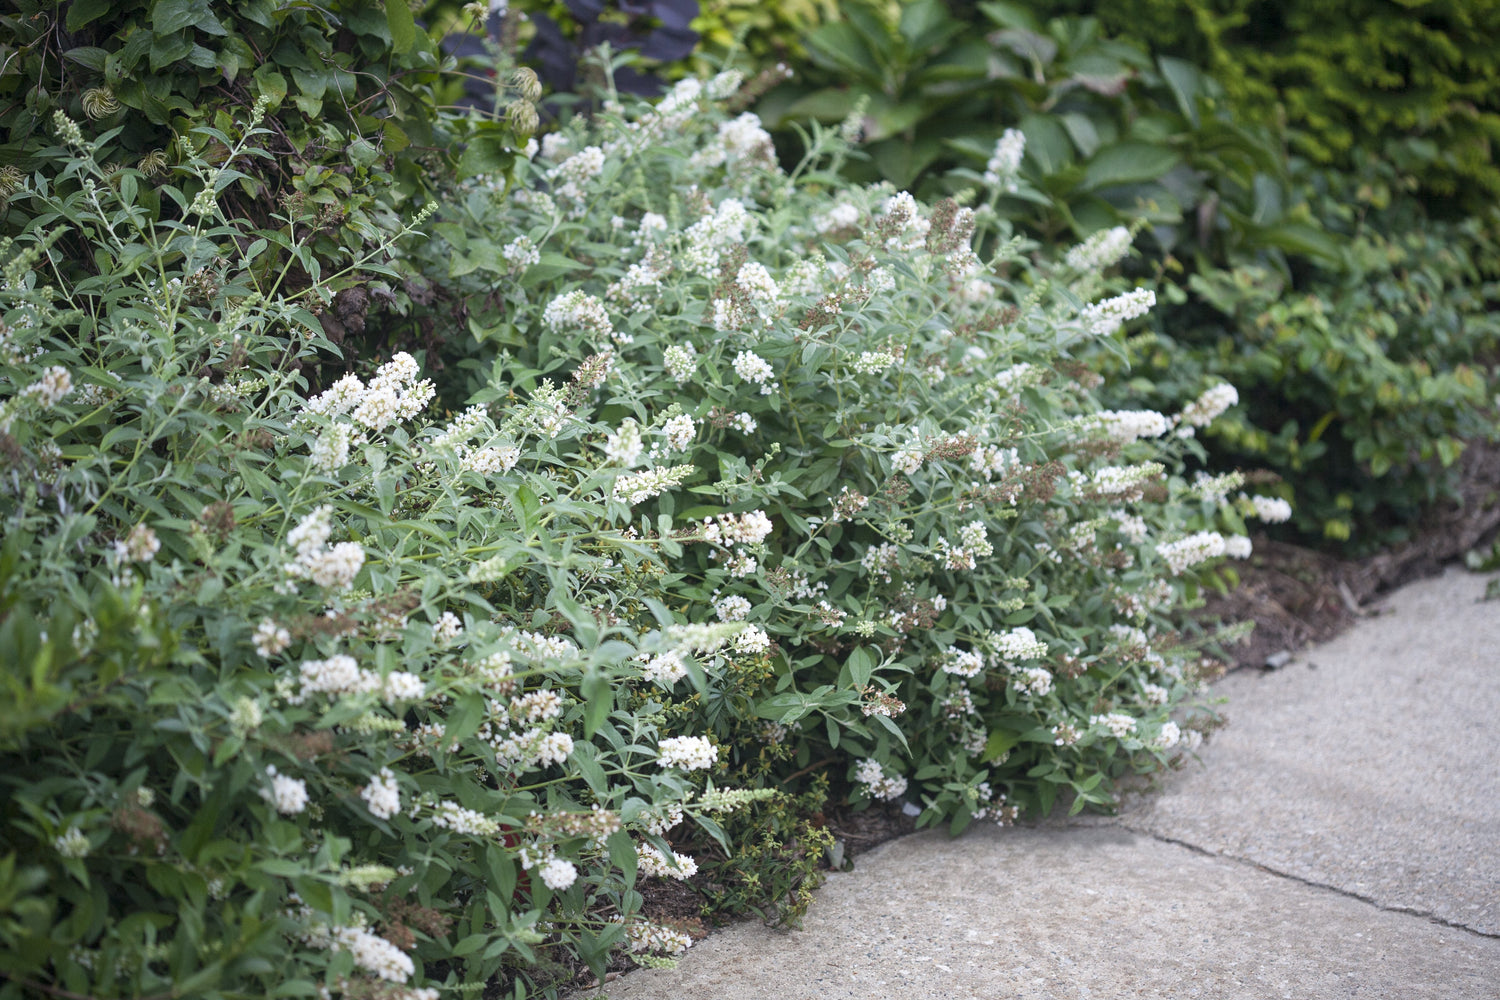 Two Ice Chip butterfly bushes blooming along a sidewalk